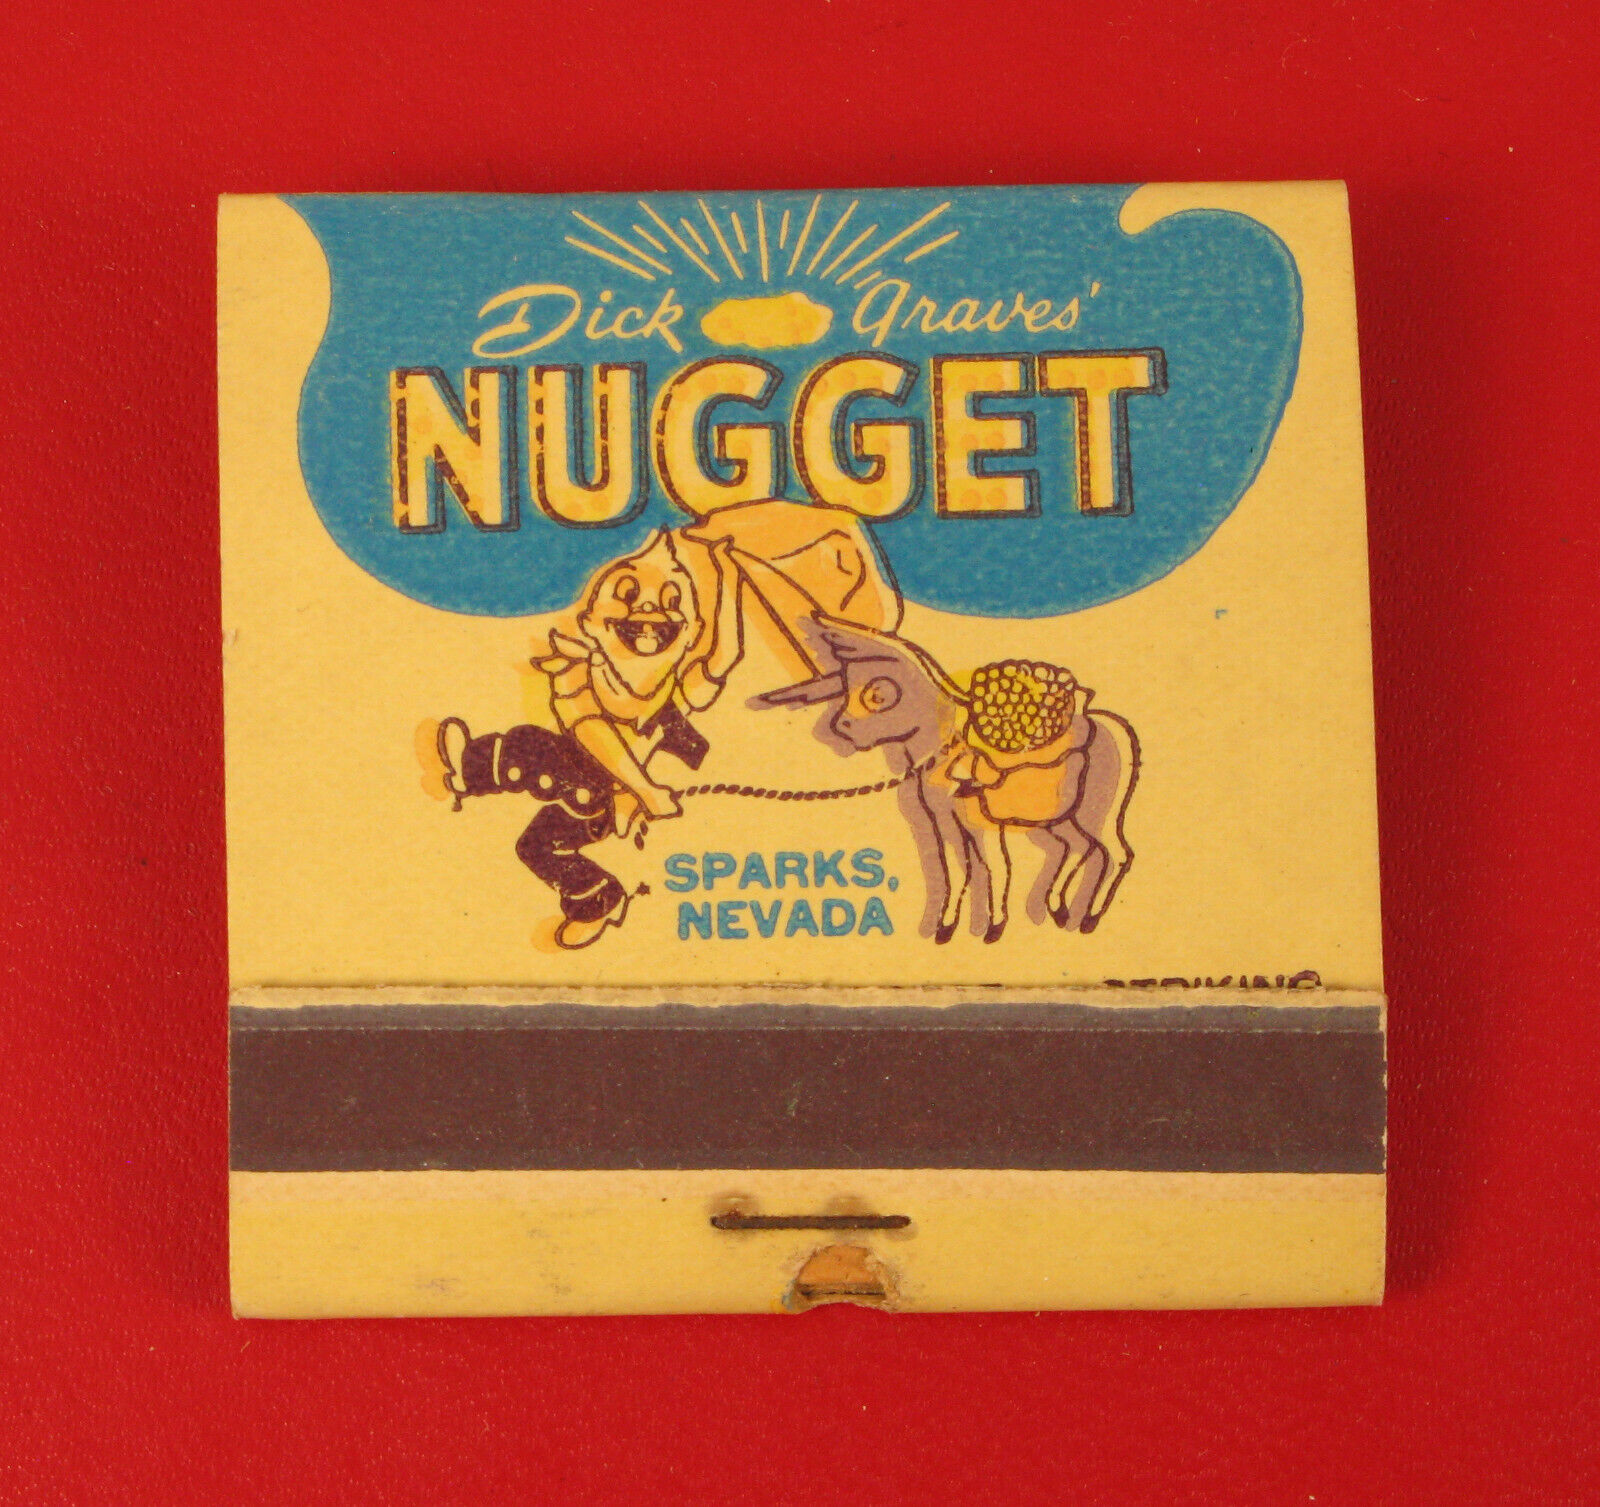 VINTAGE DICK GRAVES NUGGET CASINO GAMBLING SPARKS NEVADA MATCHBOOK MATCHES RARE 